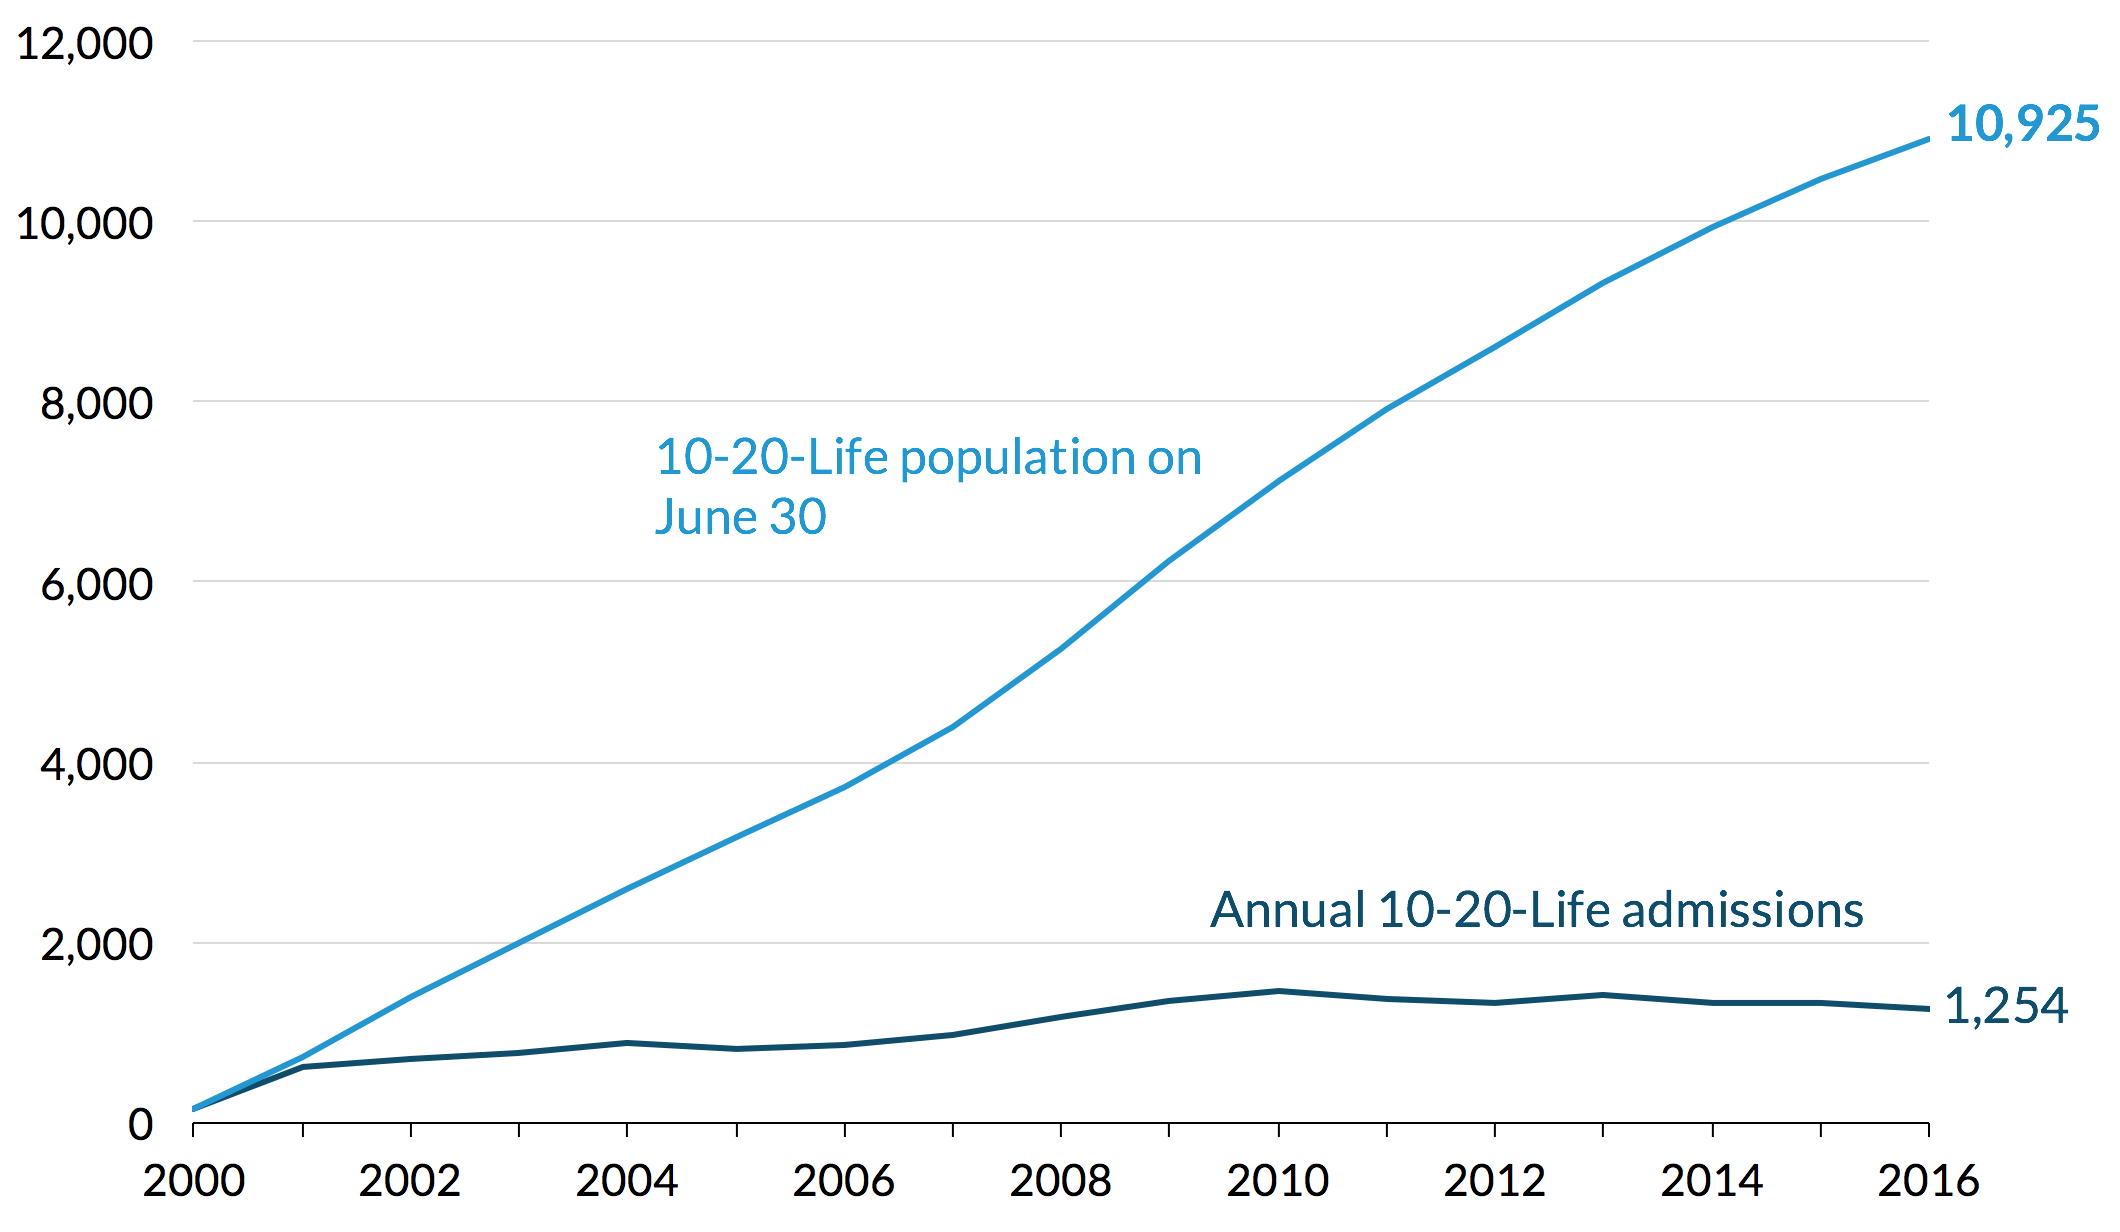 A line chart of florida prison admissions and population under the 10-20-life law, from 2000 to 2016. Annual 10-20-life annual admissions have risen slightly, from 155 in 2000 to 1,254 in 2016. 10-20-life population has risen much more rapidly, from 147 in 2000 to 10,925 in 2016.